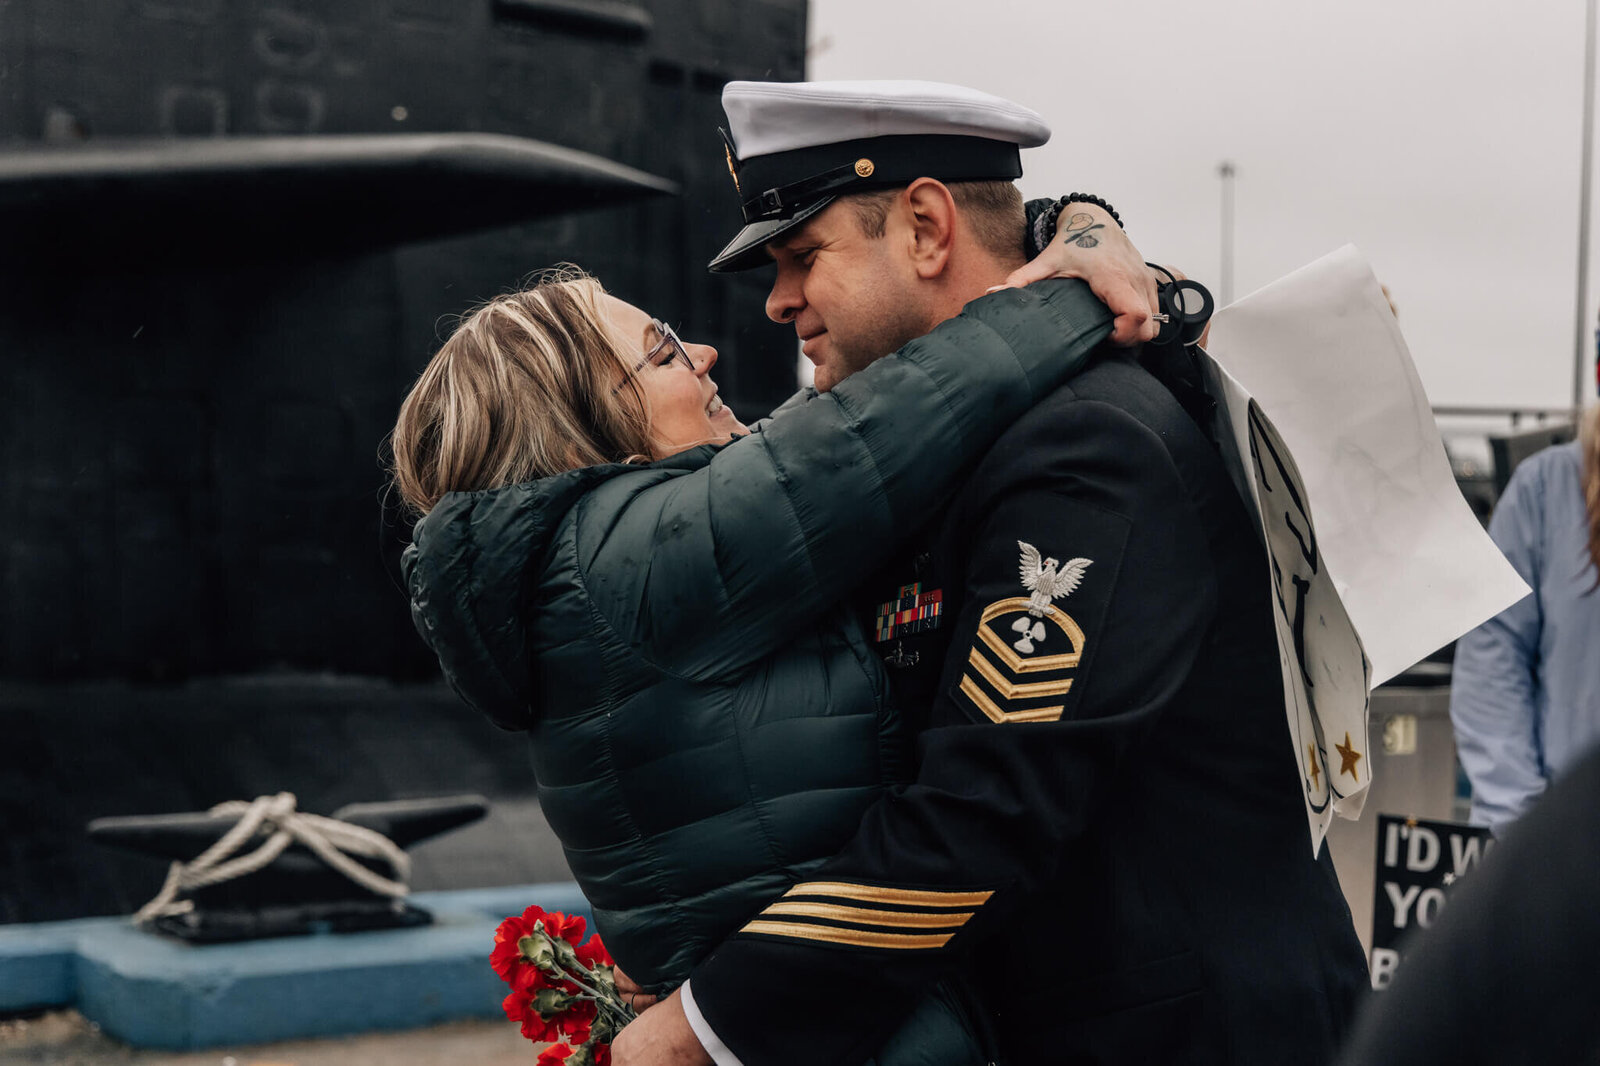 Naval Chief Petty Officer embraces spouse at emotional USS Newport News homecoming at SUBASE New London in Groton CT